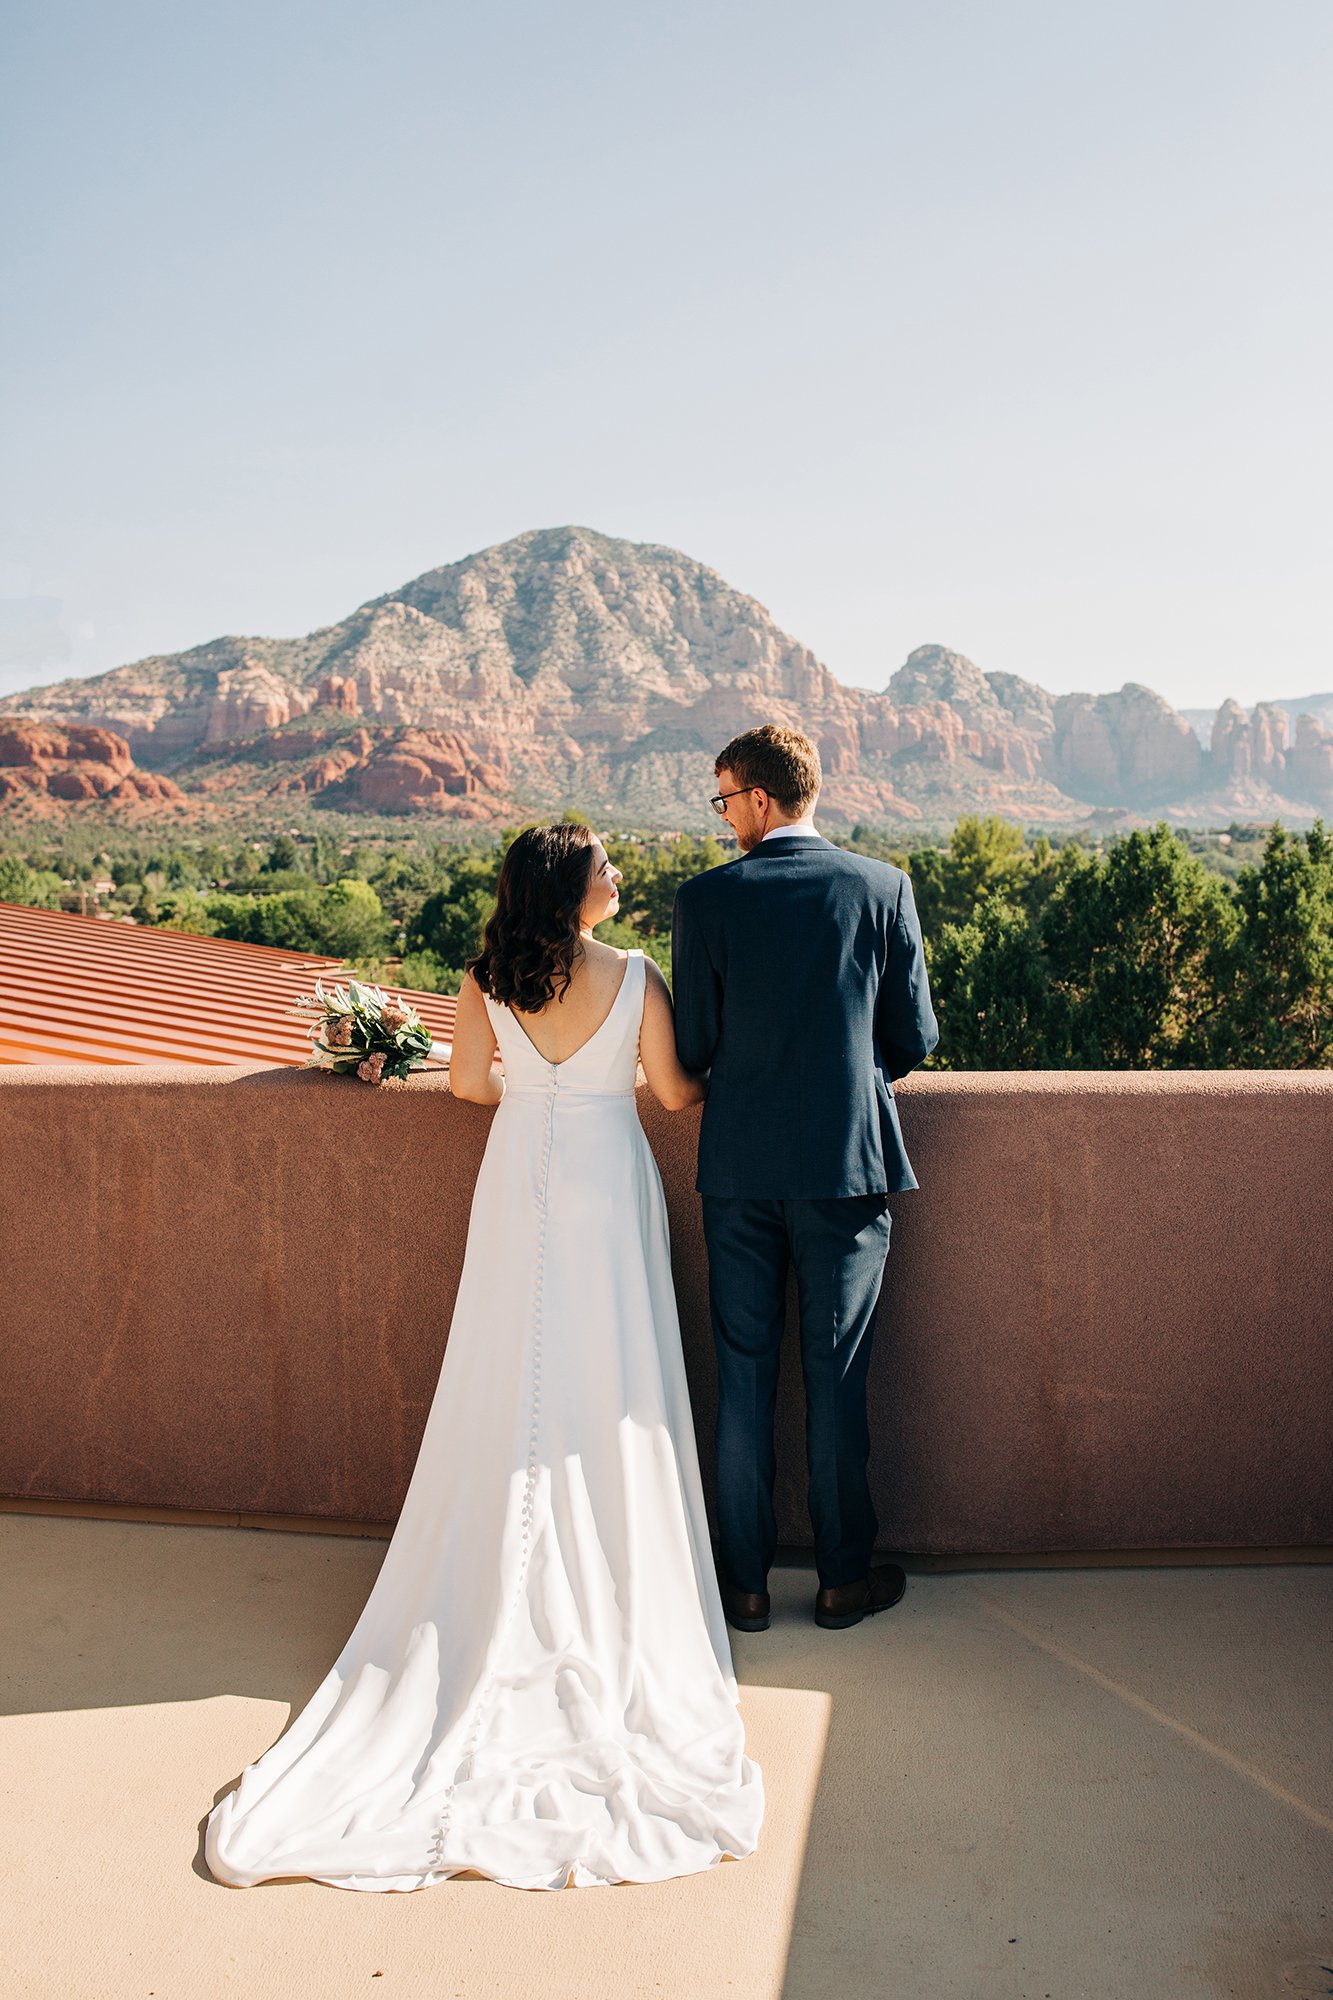 Stephanie and Matthew take in the mountain views of Sedona during their elopement wedding